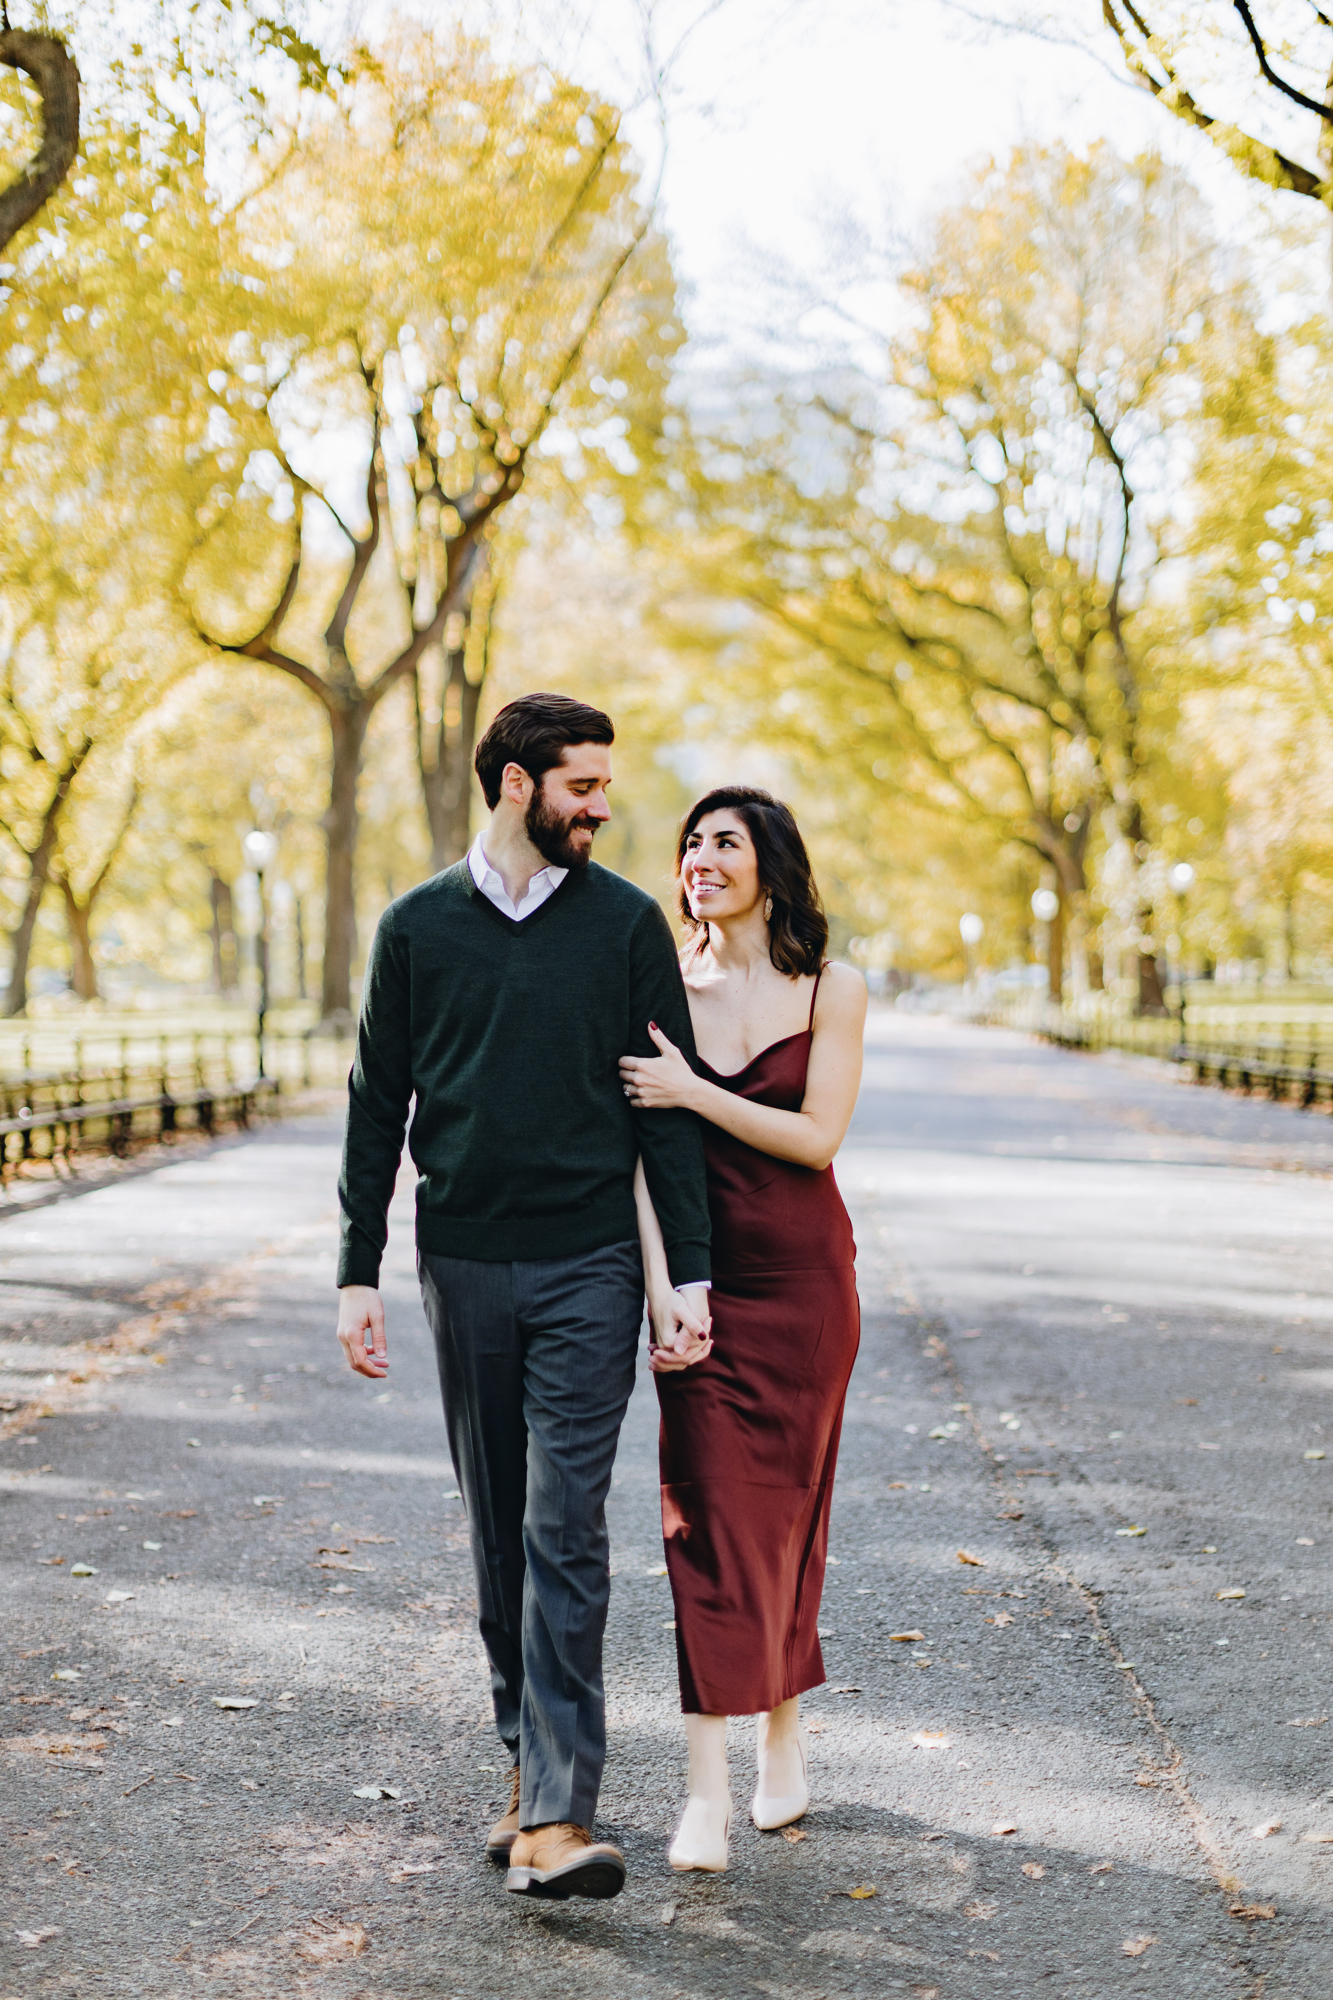 Memorable Central Park Engagement Photos in Fall